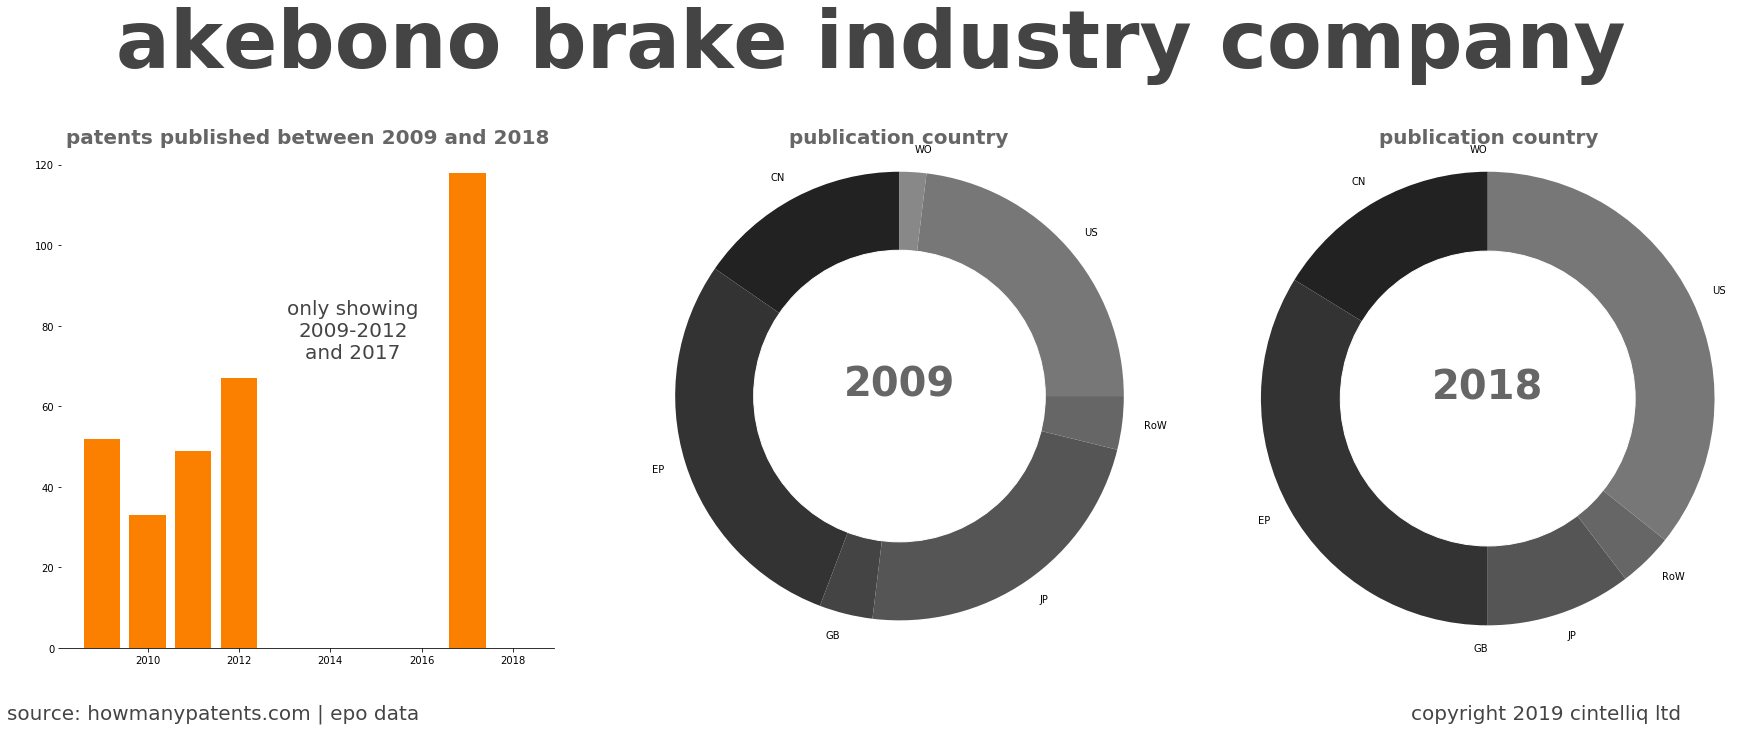 summary of patents for Akebono Brake Industry Company